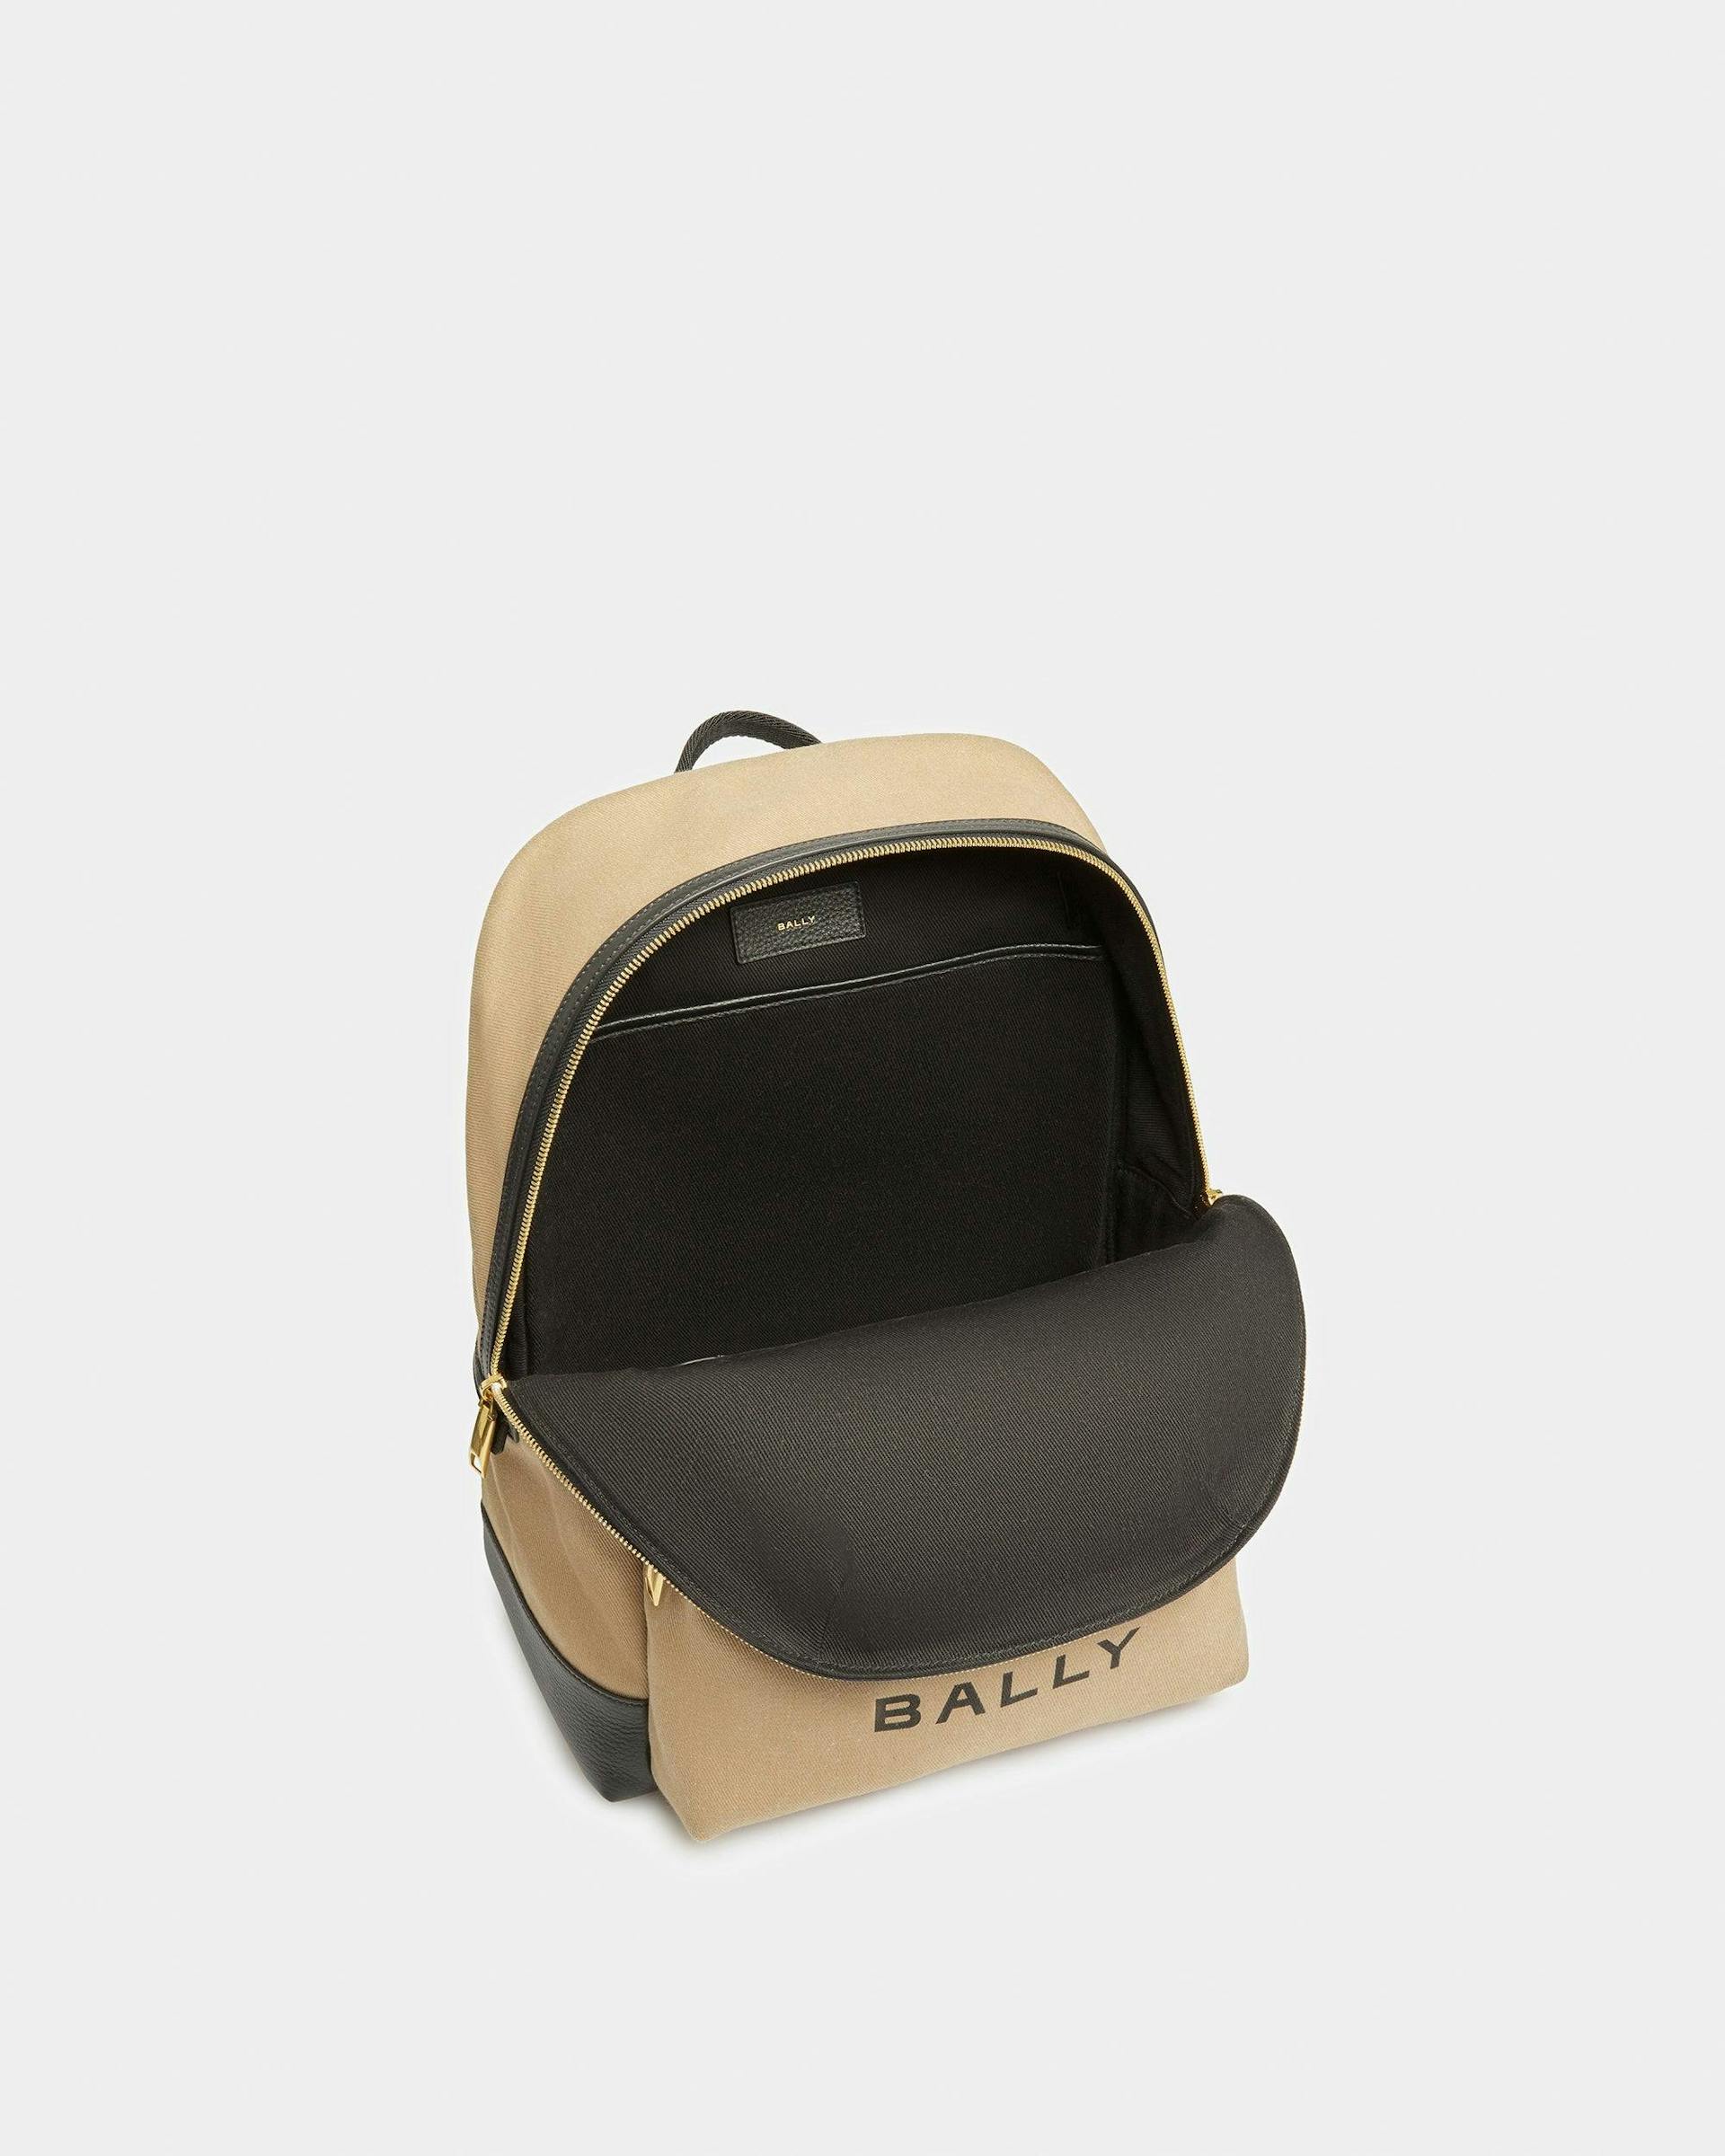 Men's Bar Backpack In Sand And Black Fabric And Leather | Bally | Still Life Open / Inside